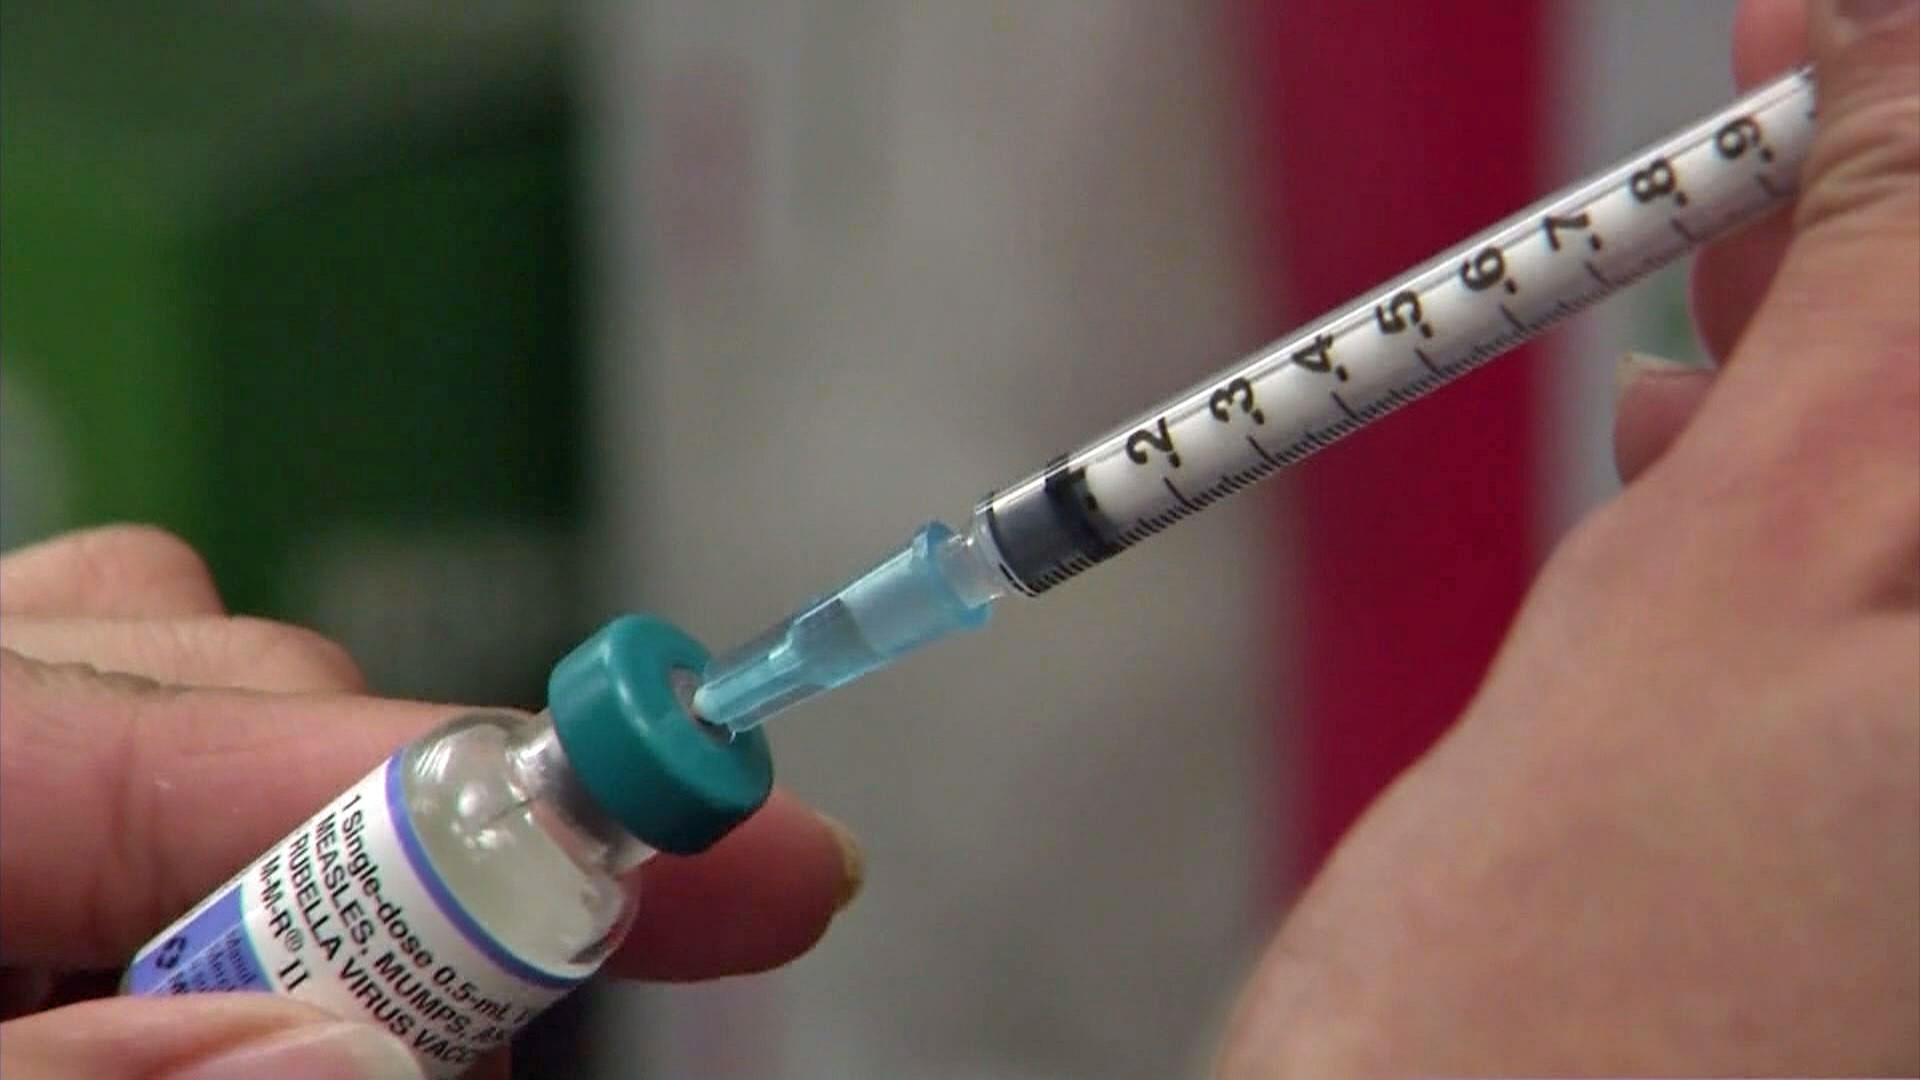 The Bell County Public Health District said there were four possible cases of measles in the county, but the other three tested negative for the virus.